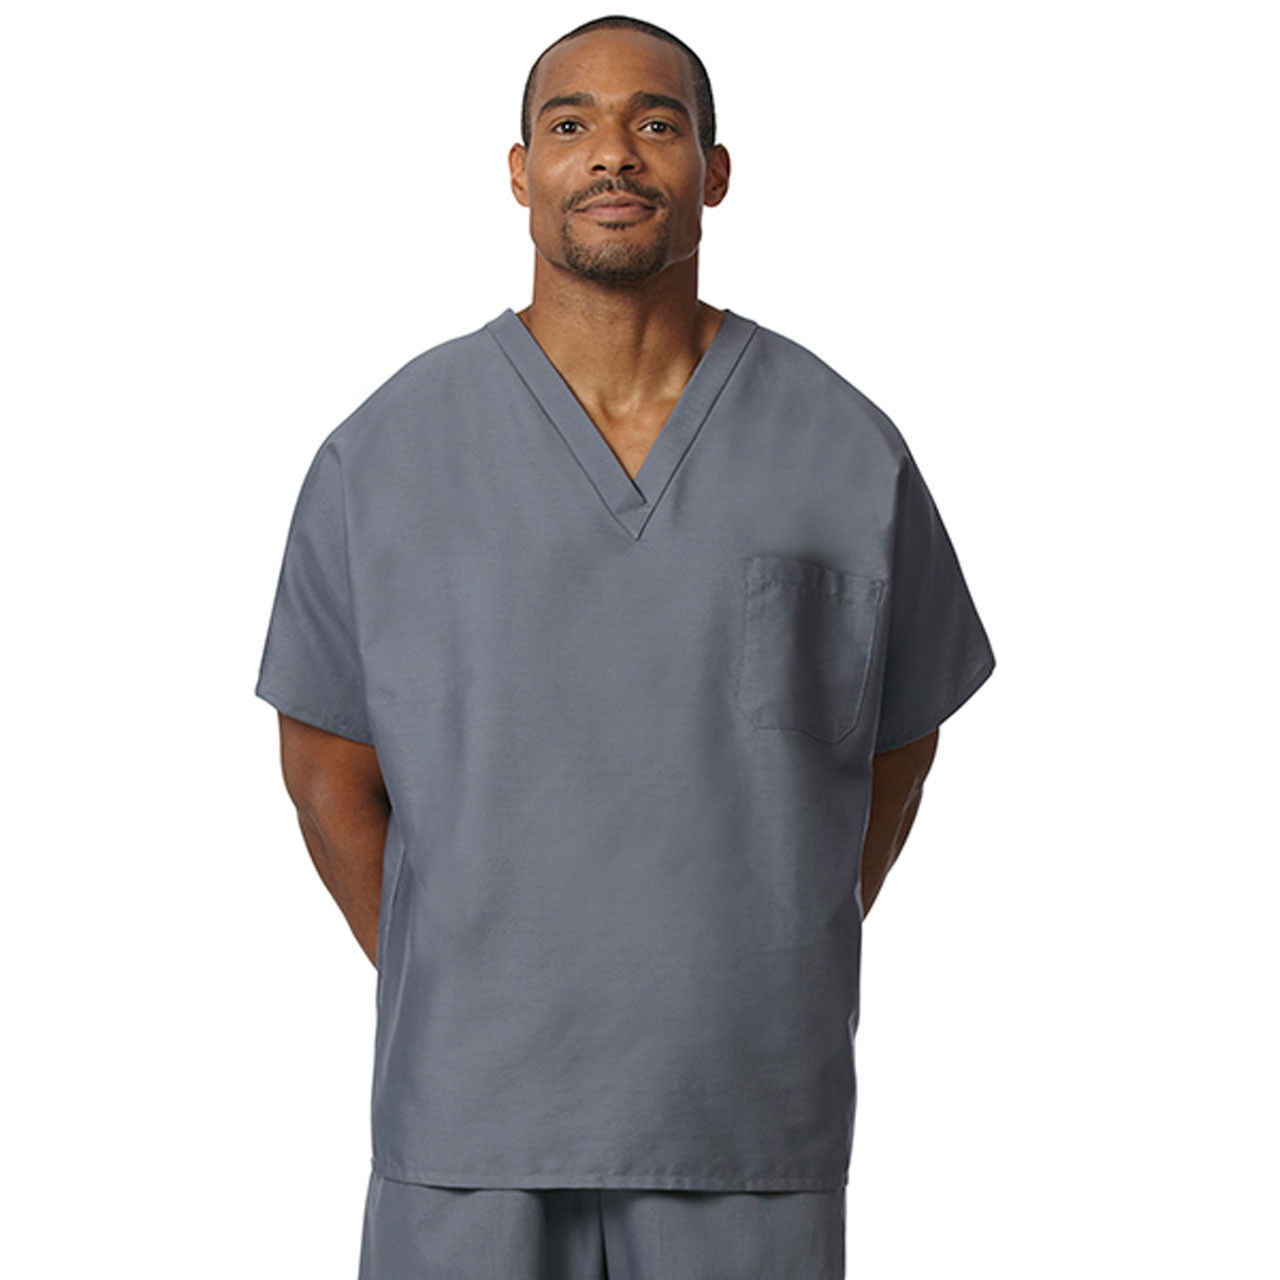 What color are the Gray Scrub Tops?